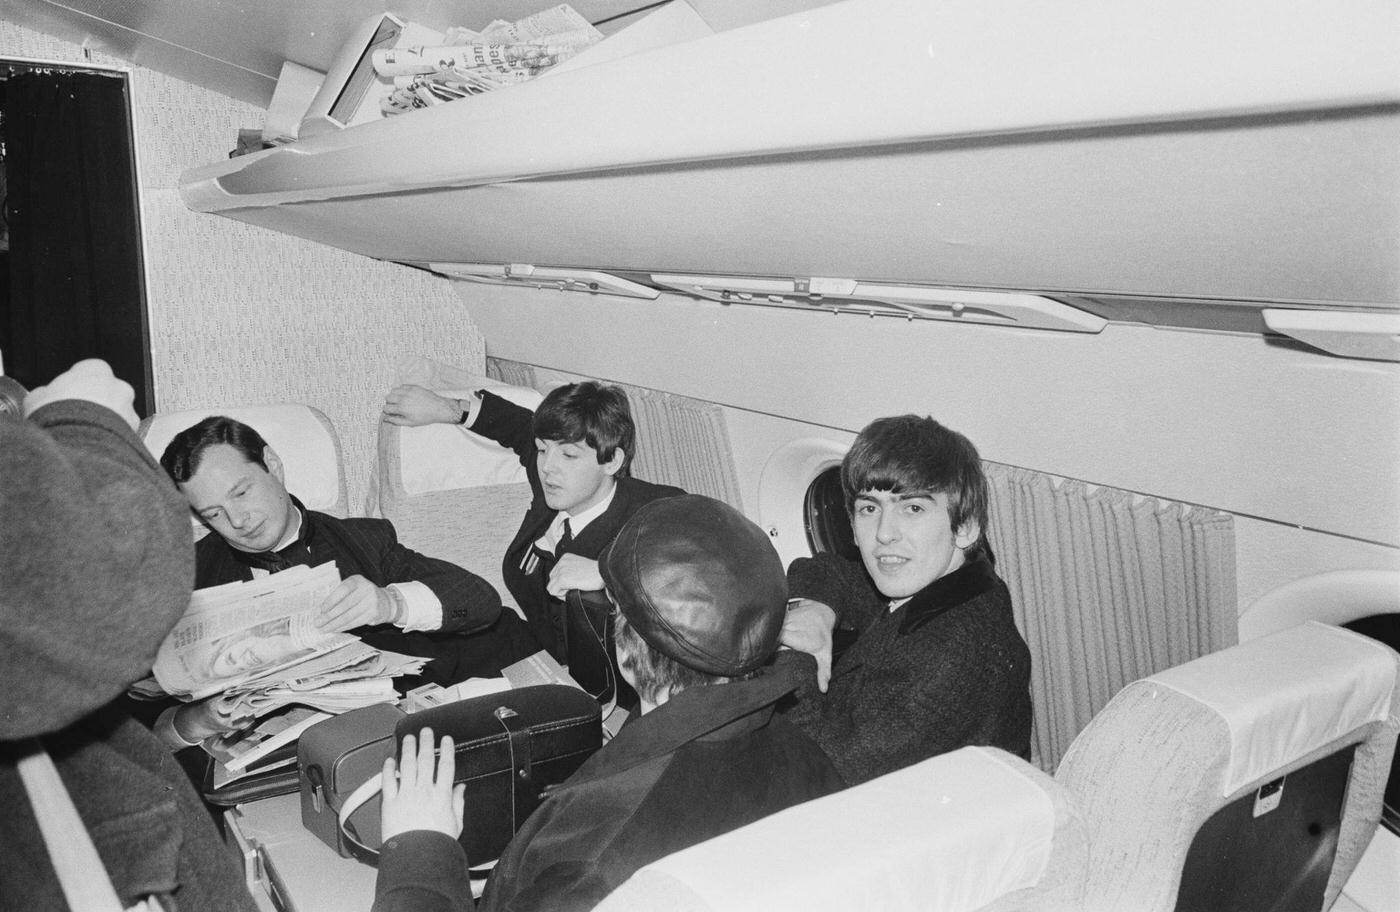 Members of The Beatles on board a plane bound for Paris in January 1964, left to right: manager Brian Epstein, Paul McCartney, John Lennon, and George Harrison.